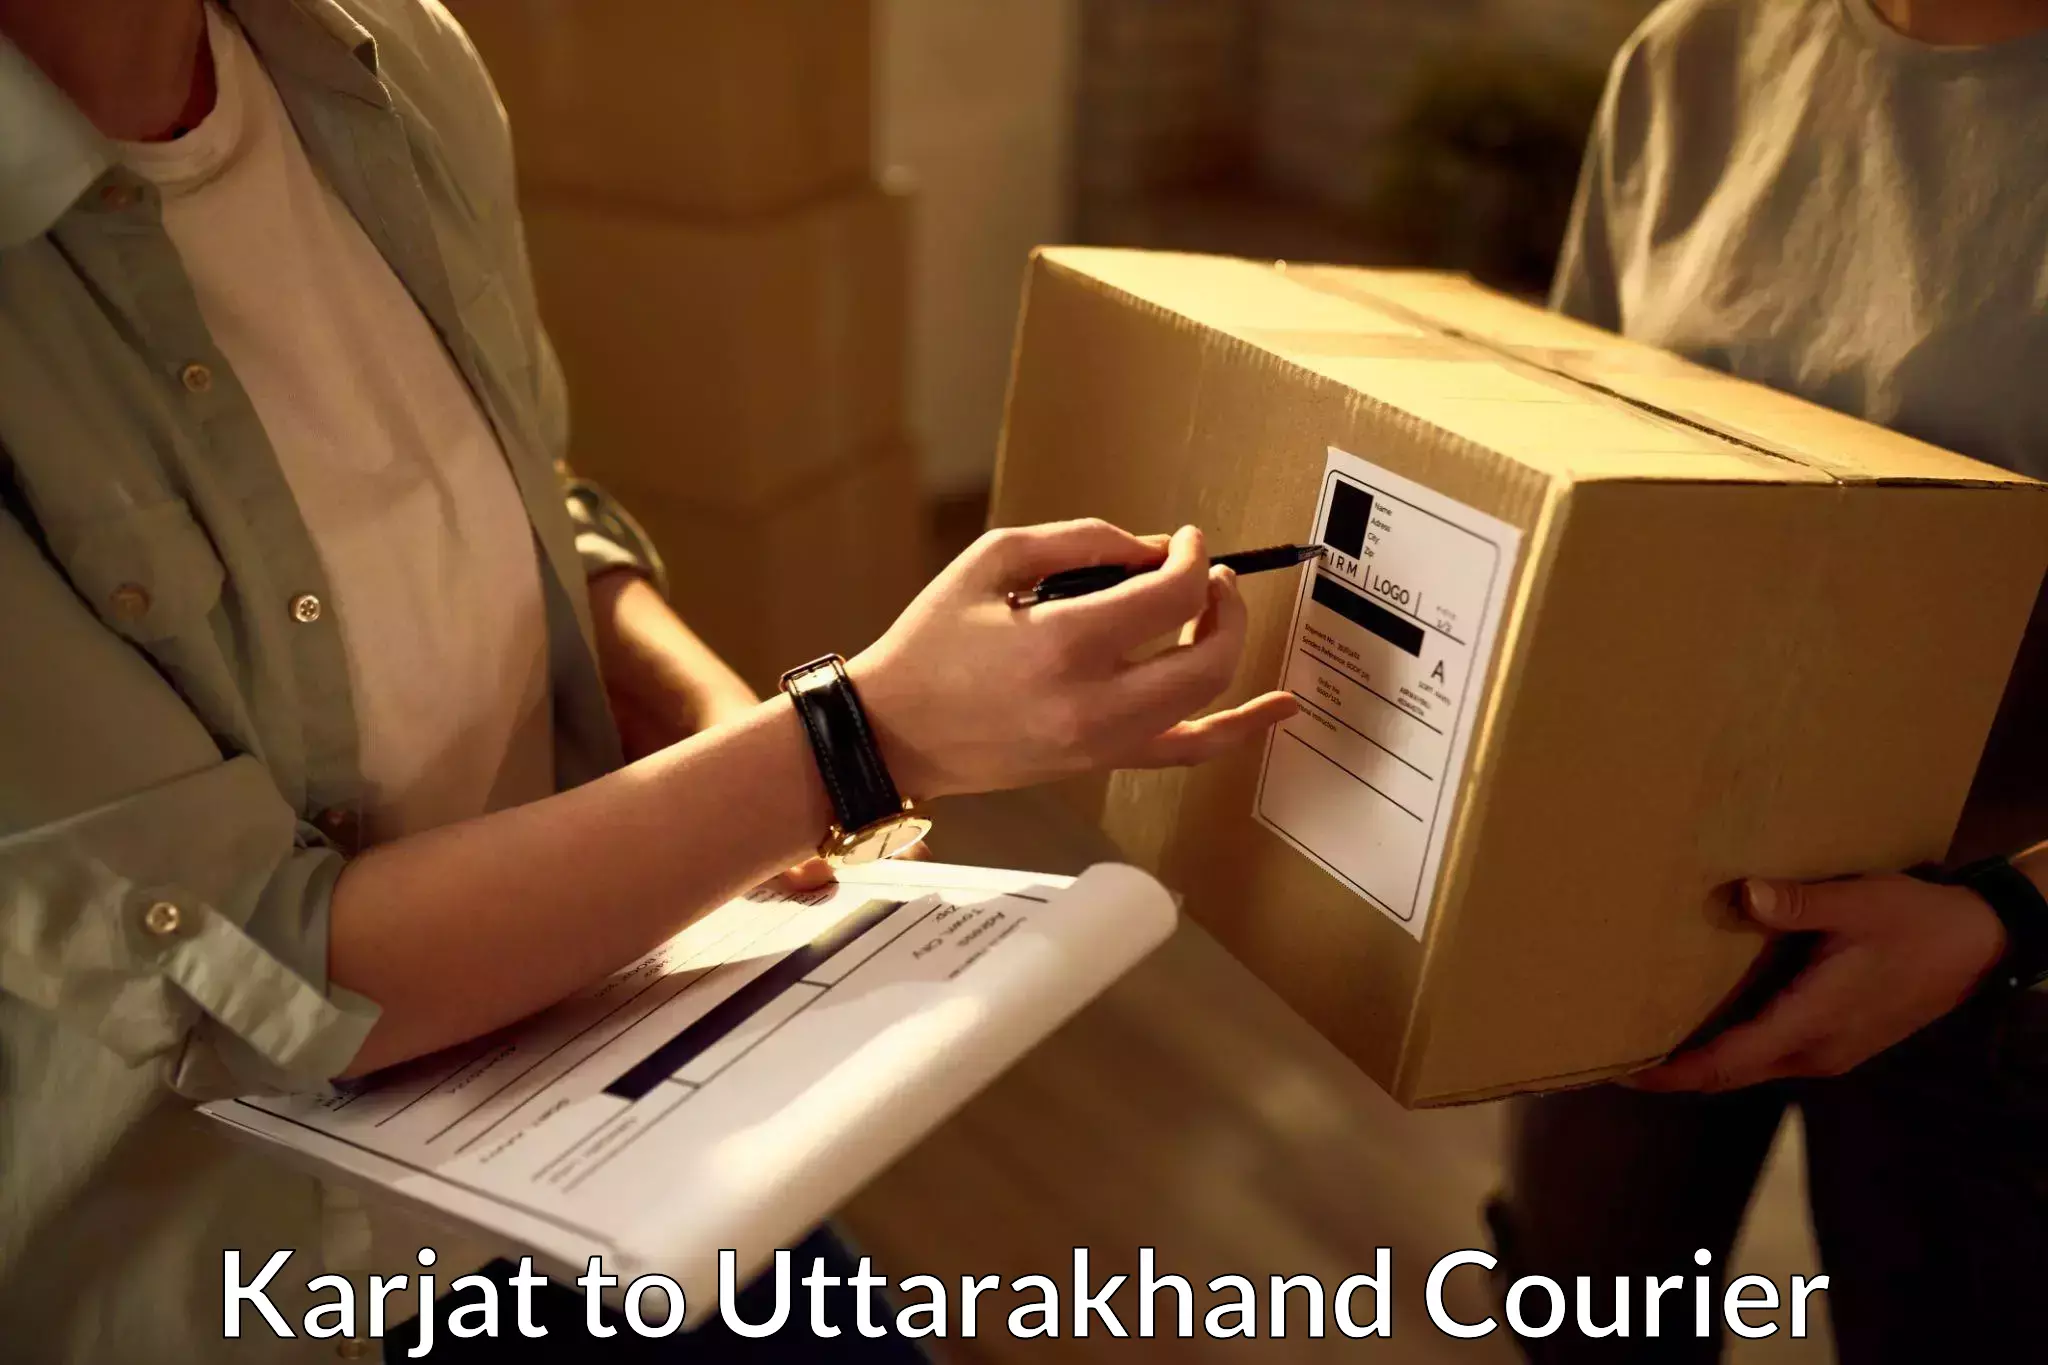 Courier service booking Karjat to Rudraprayag